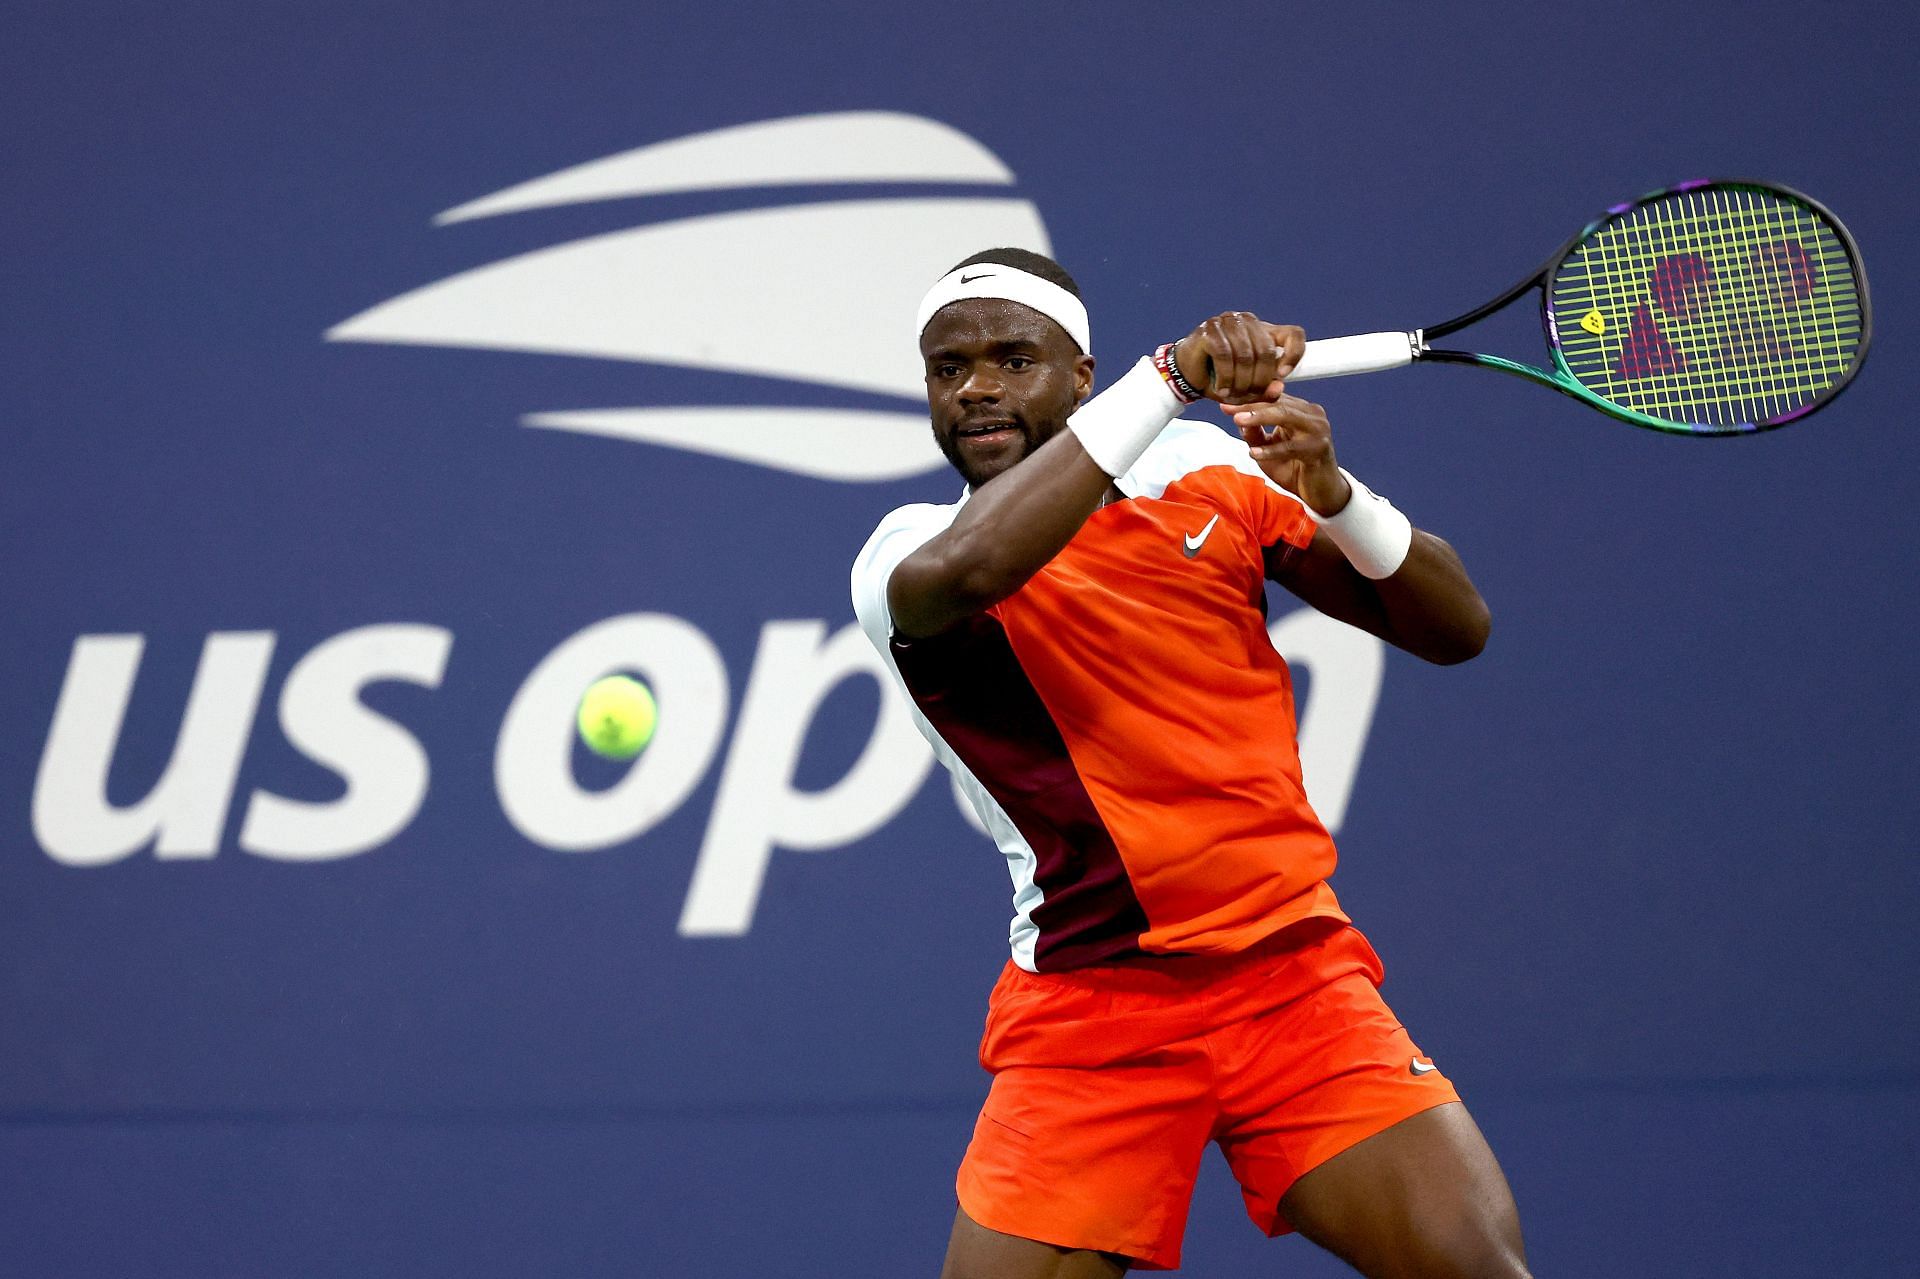 Tiafoe in action at the 2022 US Open